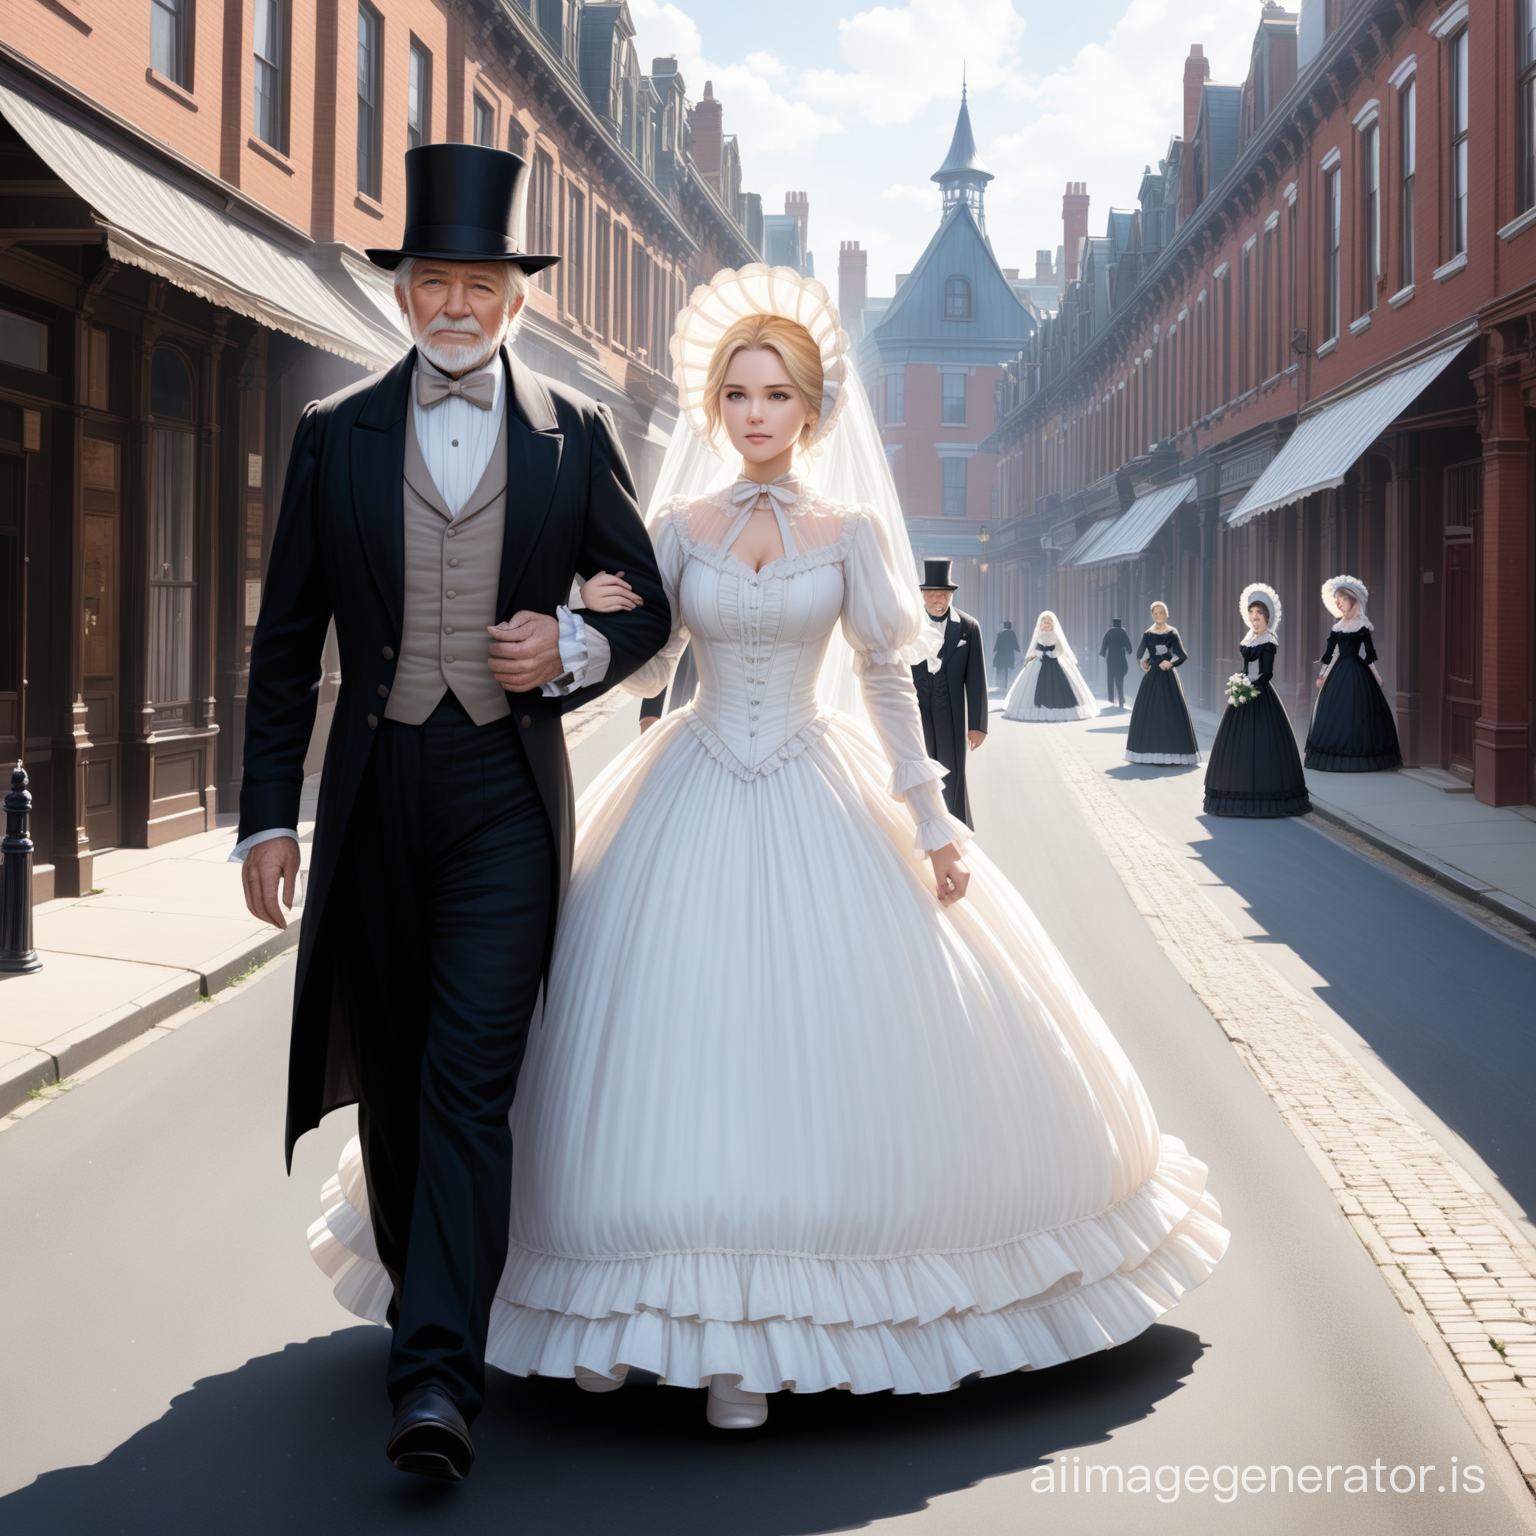 Susan Storm from the FF4 wearing a black floor-length loose billowing 1860 Victorian crinoline poofy dress with a frilly bonnet walking on a Victorian era street with an old man dressed into a black Victorian suit who seems to be her newlywed husband